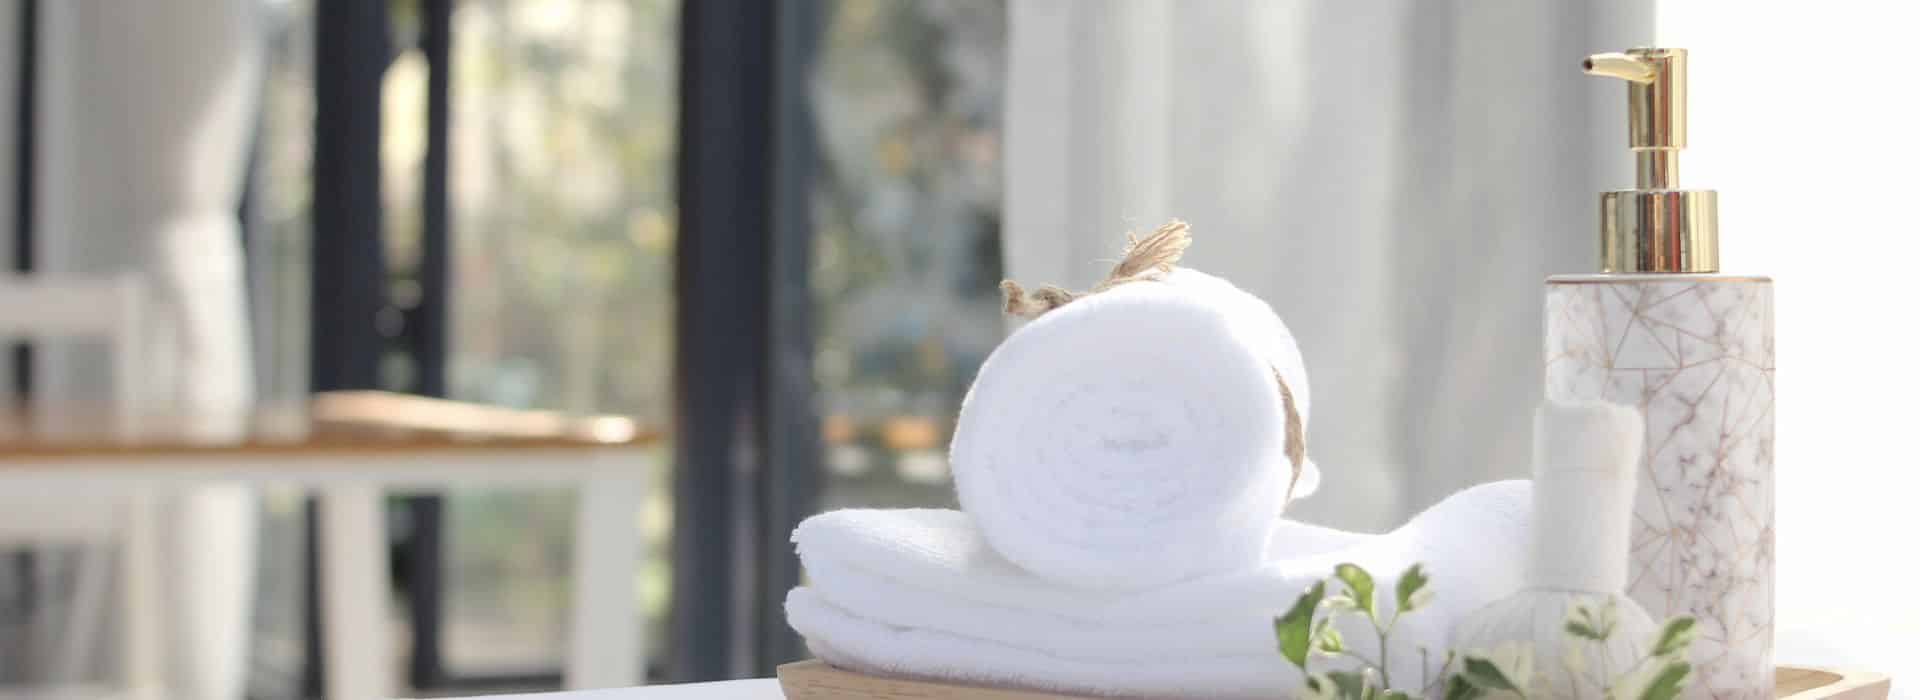 Beautiful towels on the side of a bath | The Perfect Bath: Create the Ultimate Ritual Bathing Experience | Shine Body & Bath Blog